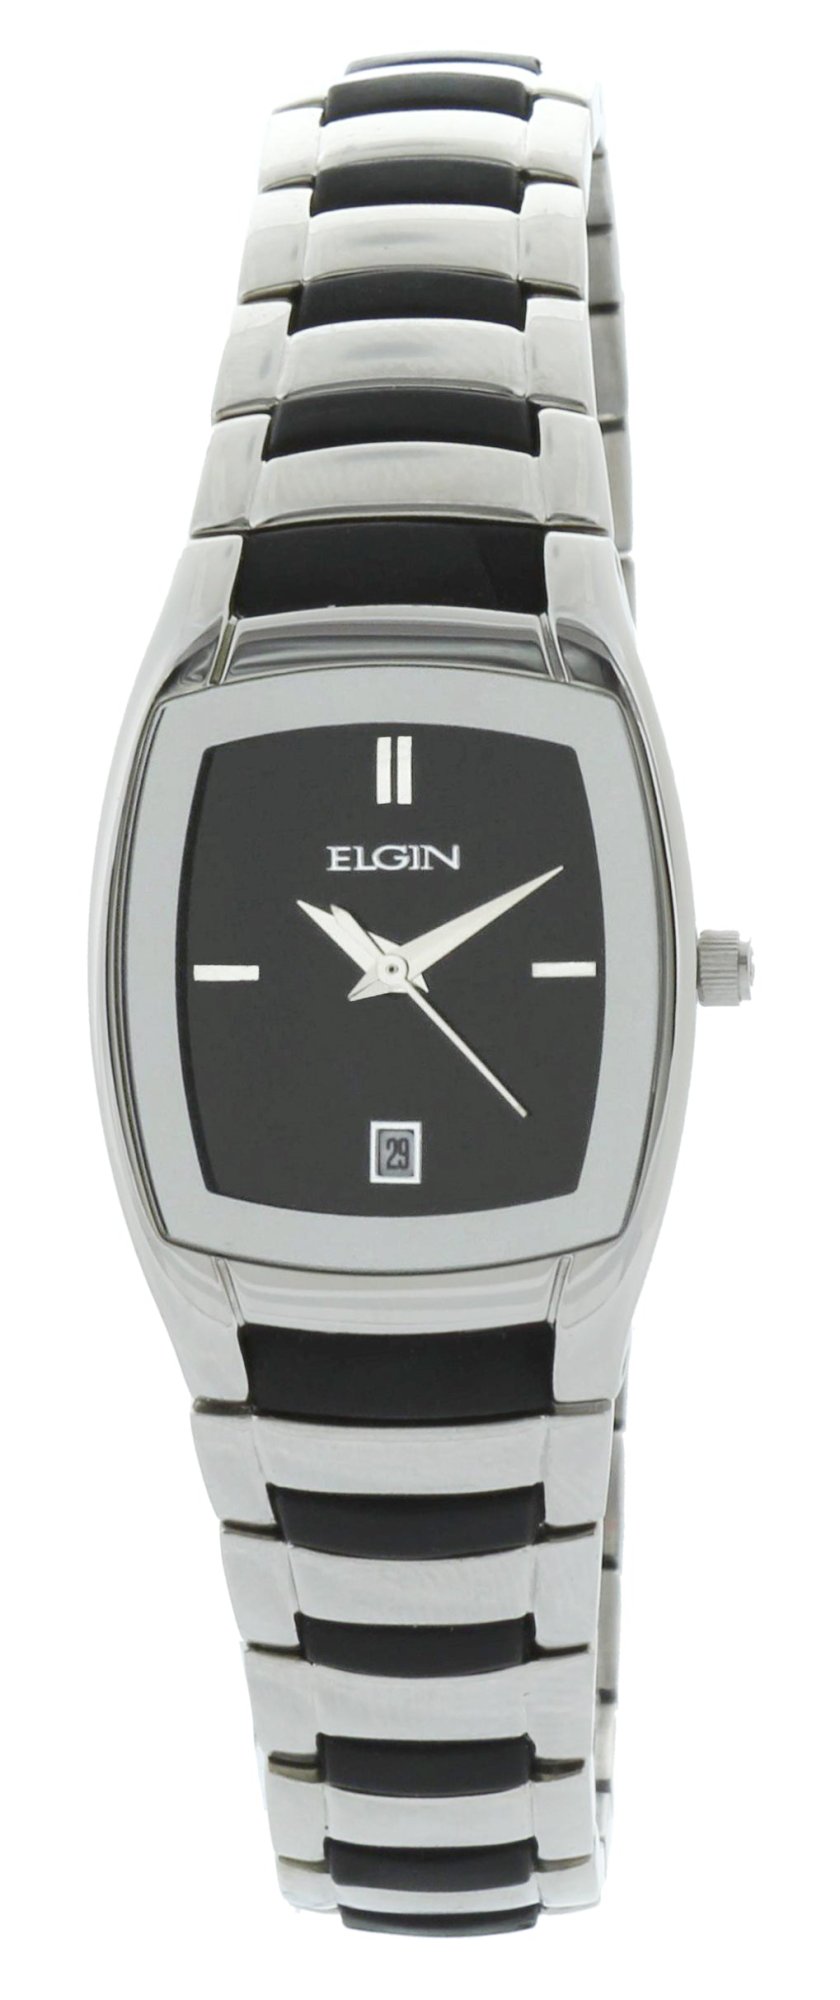 Model: Women's Elgin Integrated Bracelet Watch in Silver Tone with Black Sunray Dial and Rubber Strap